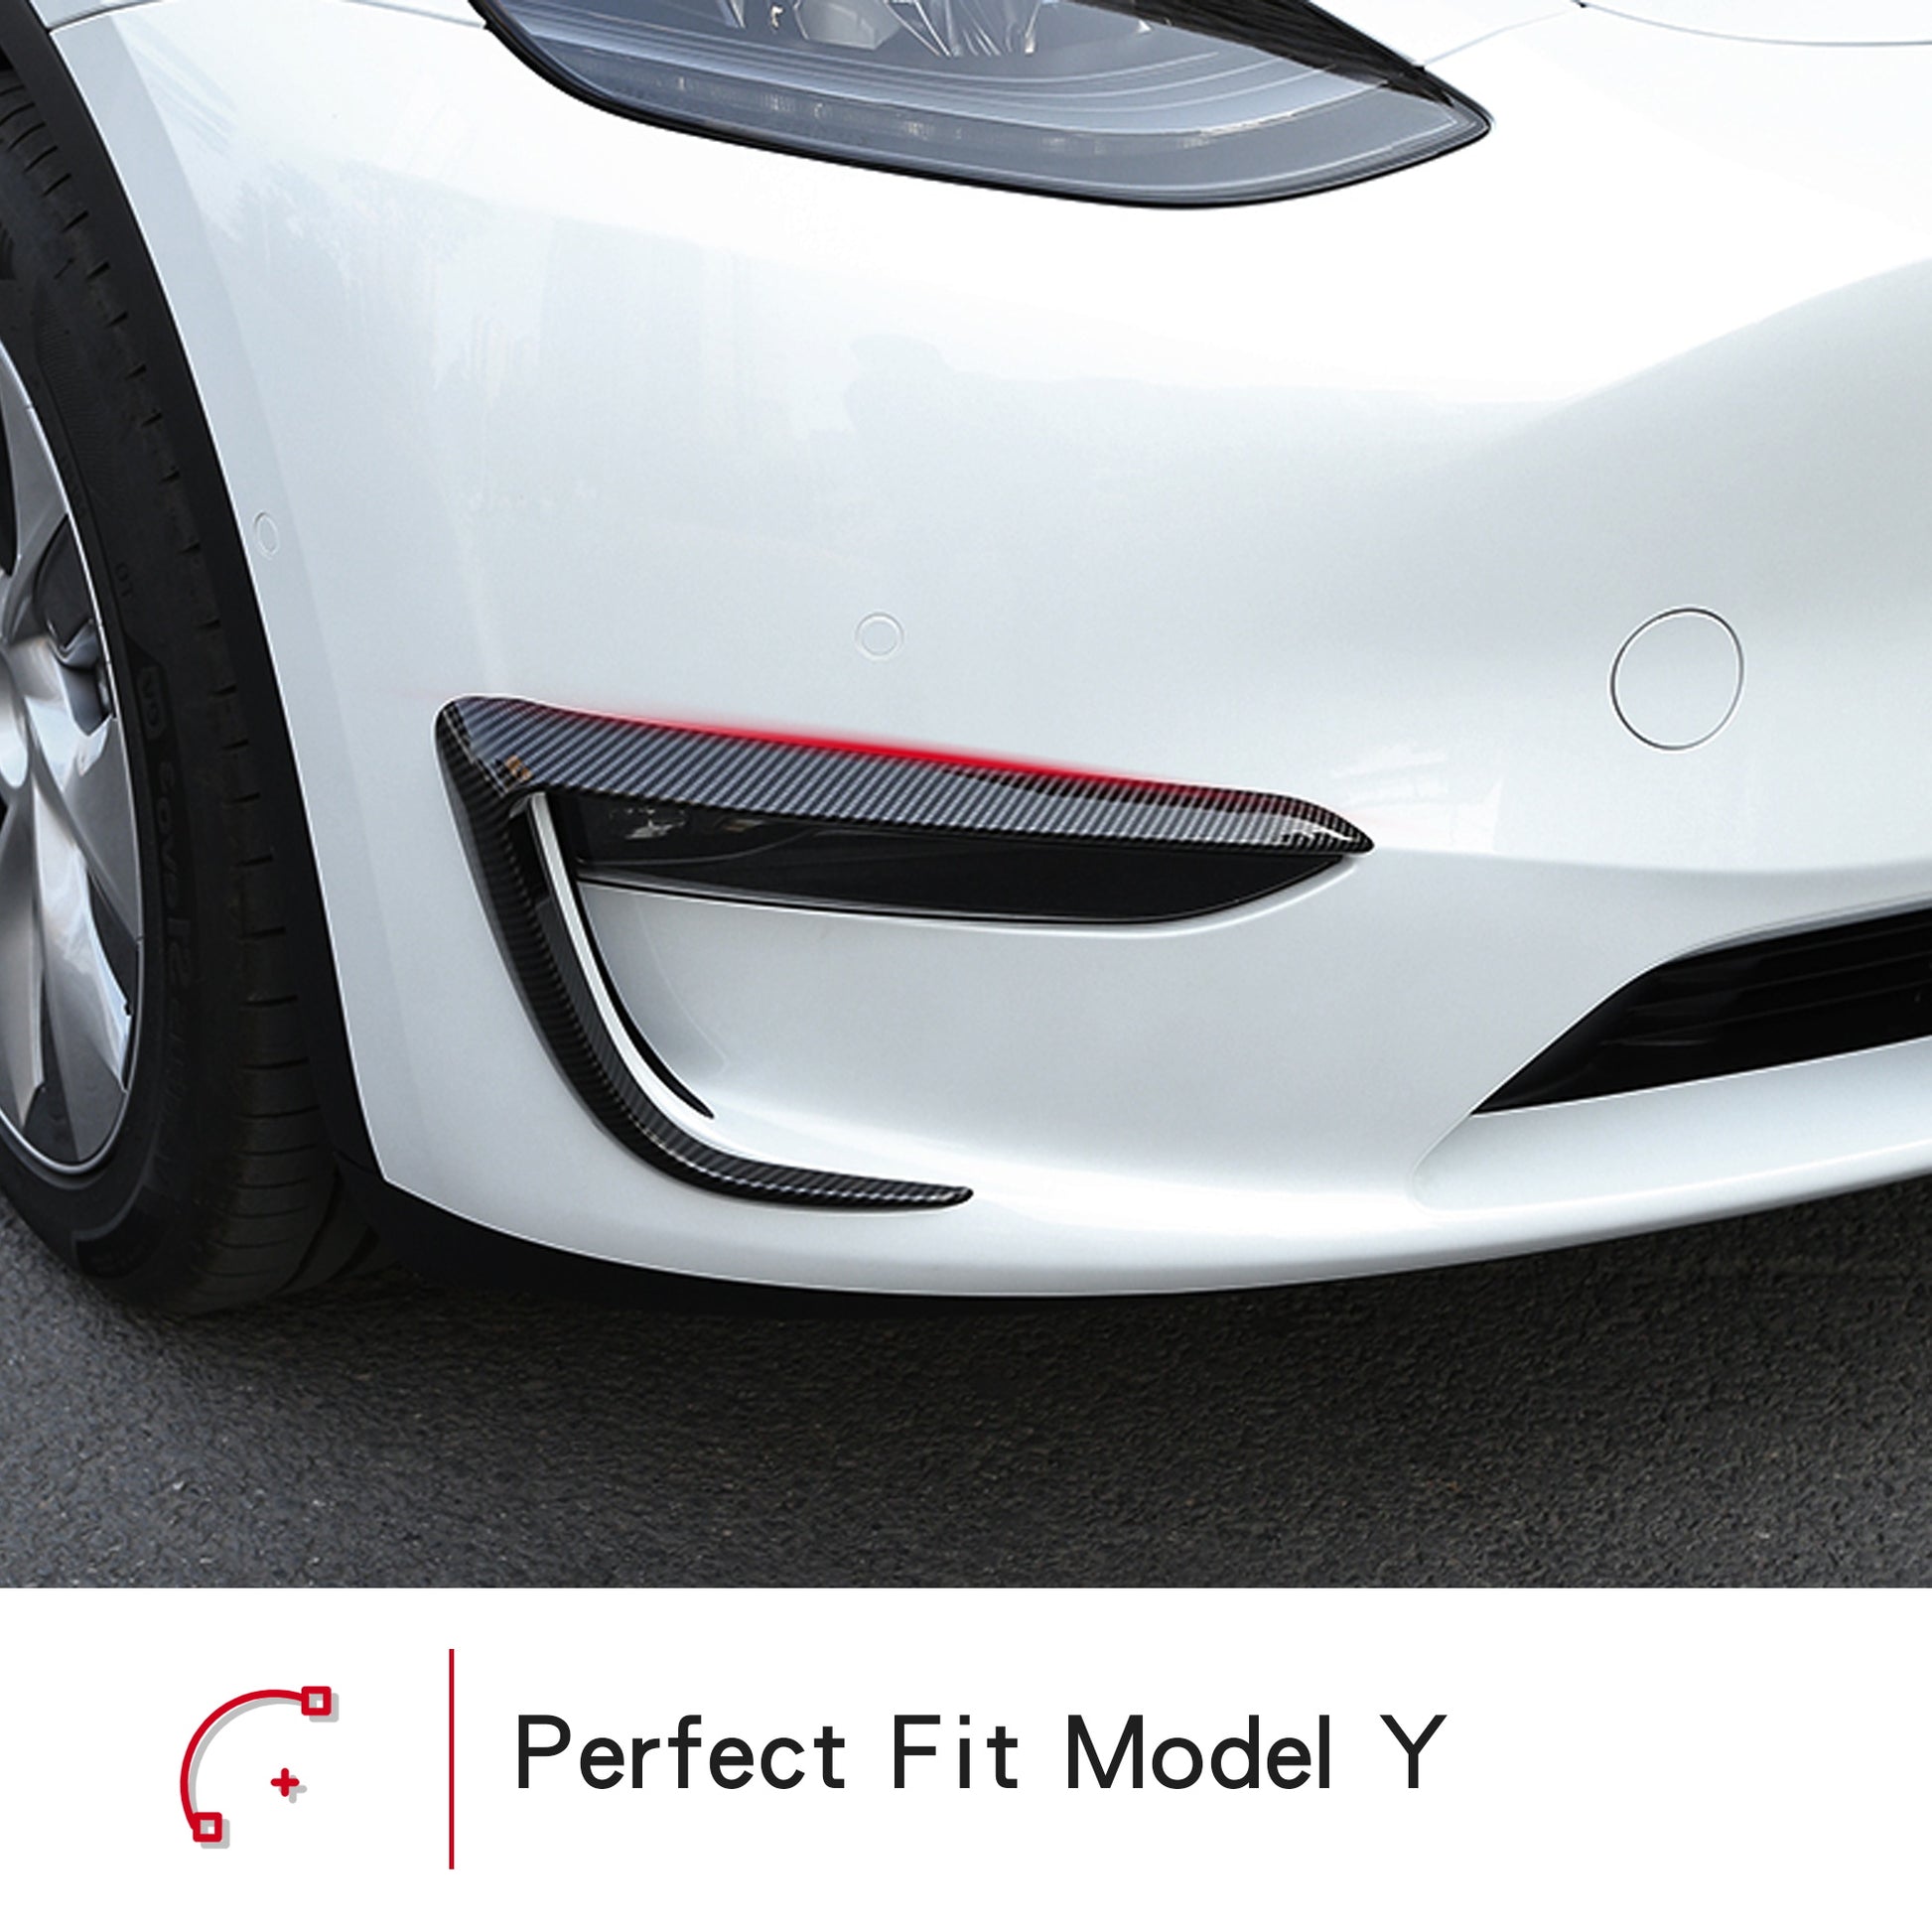 tesla model Y front fog light trim cover covers lamp frame blade car 2022 2023 2021 2020 2019 2018 s3xy arcoche accessories accessory aftermarket price Vehicles standard long range performance sr+ electric car rwd ev interior exterior diy decoration price elon musk must have black white red blue 5 7 seats seat